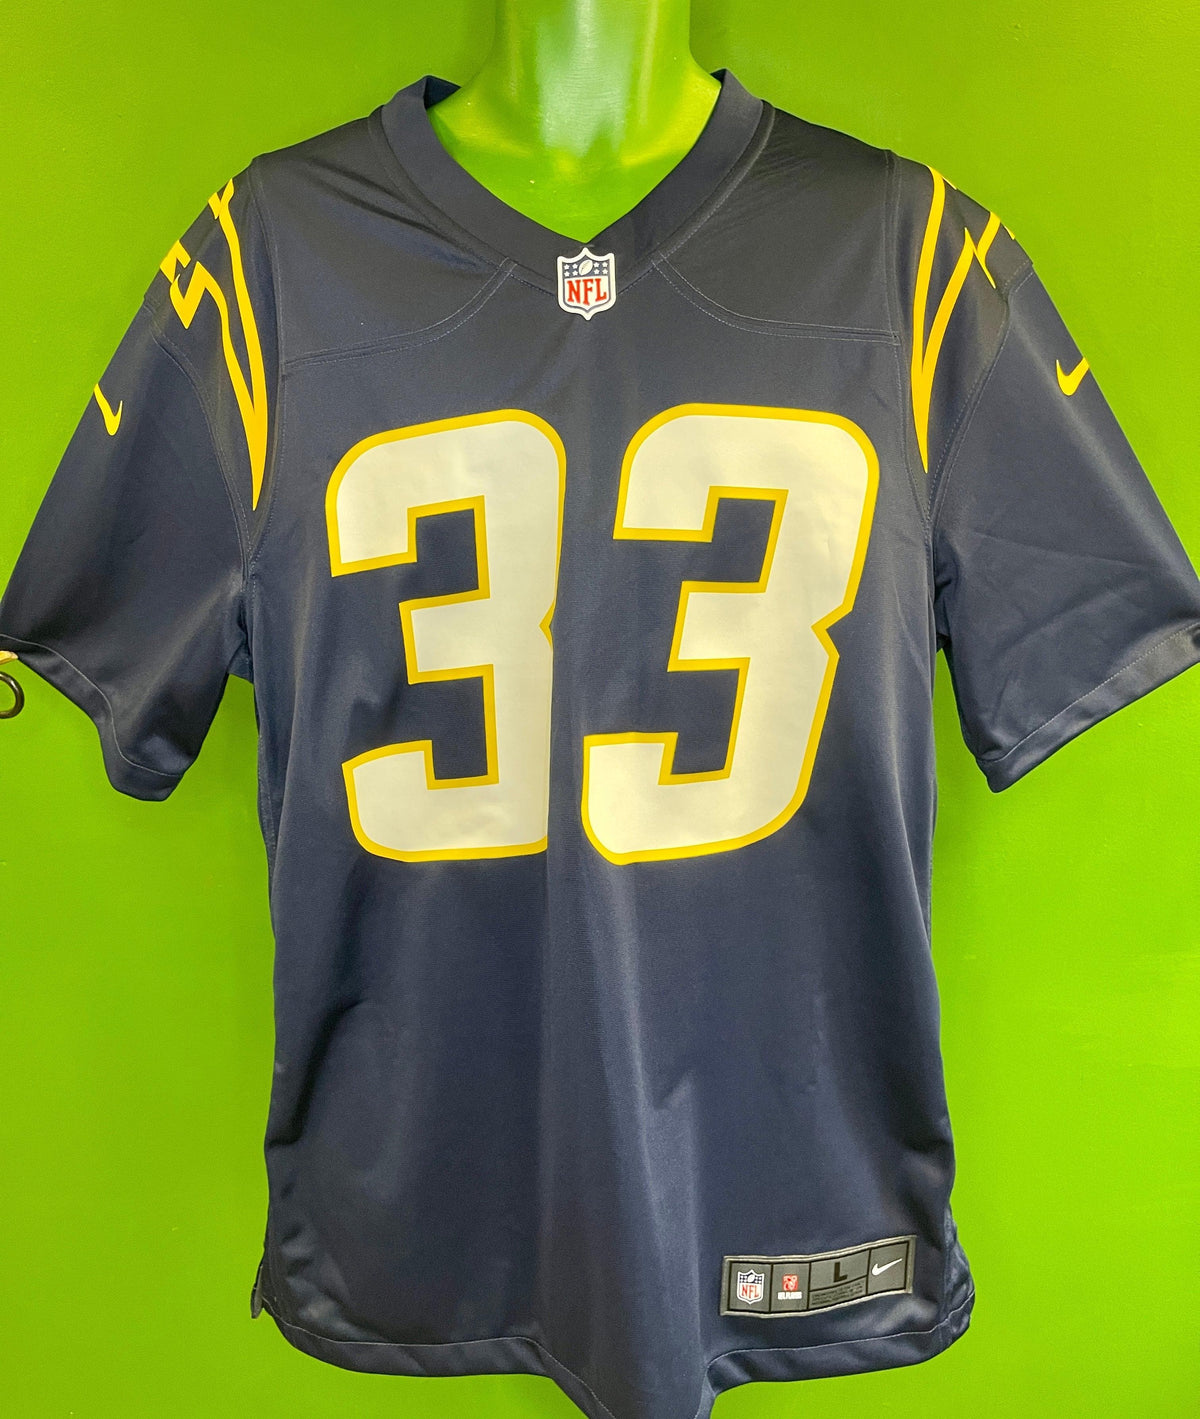 NFL Los Angeles Chargers Derwin James #33 Game Jersey Men's Large NWOT